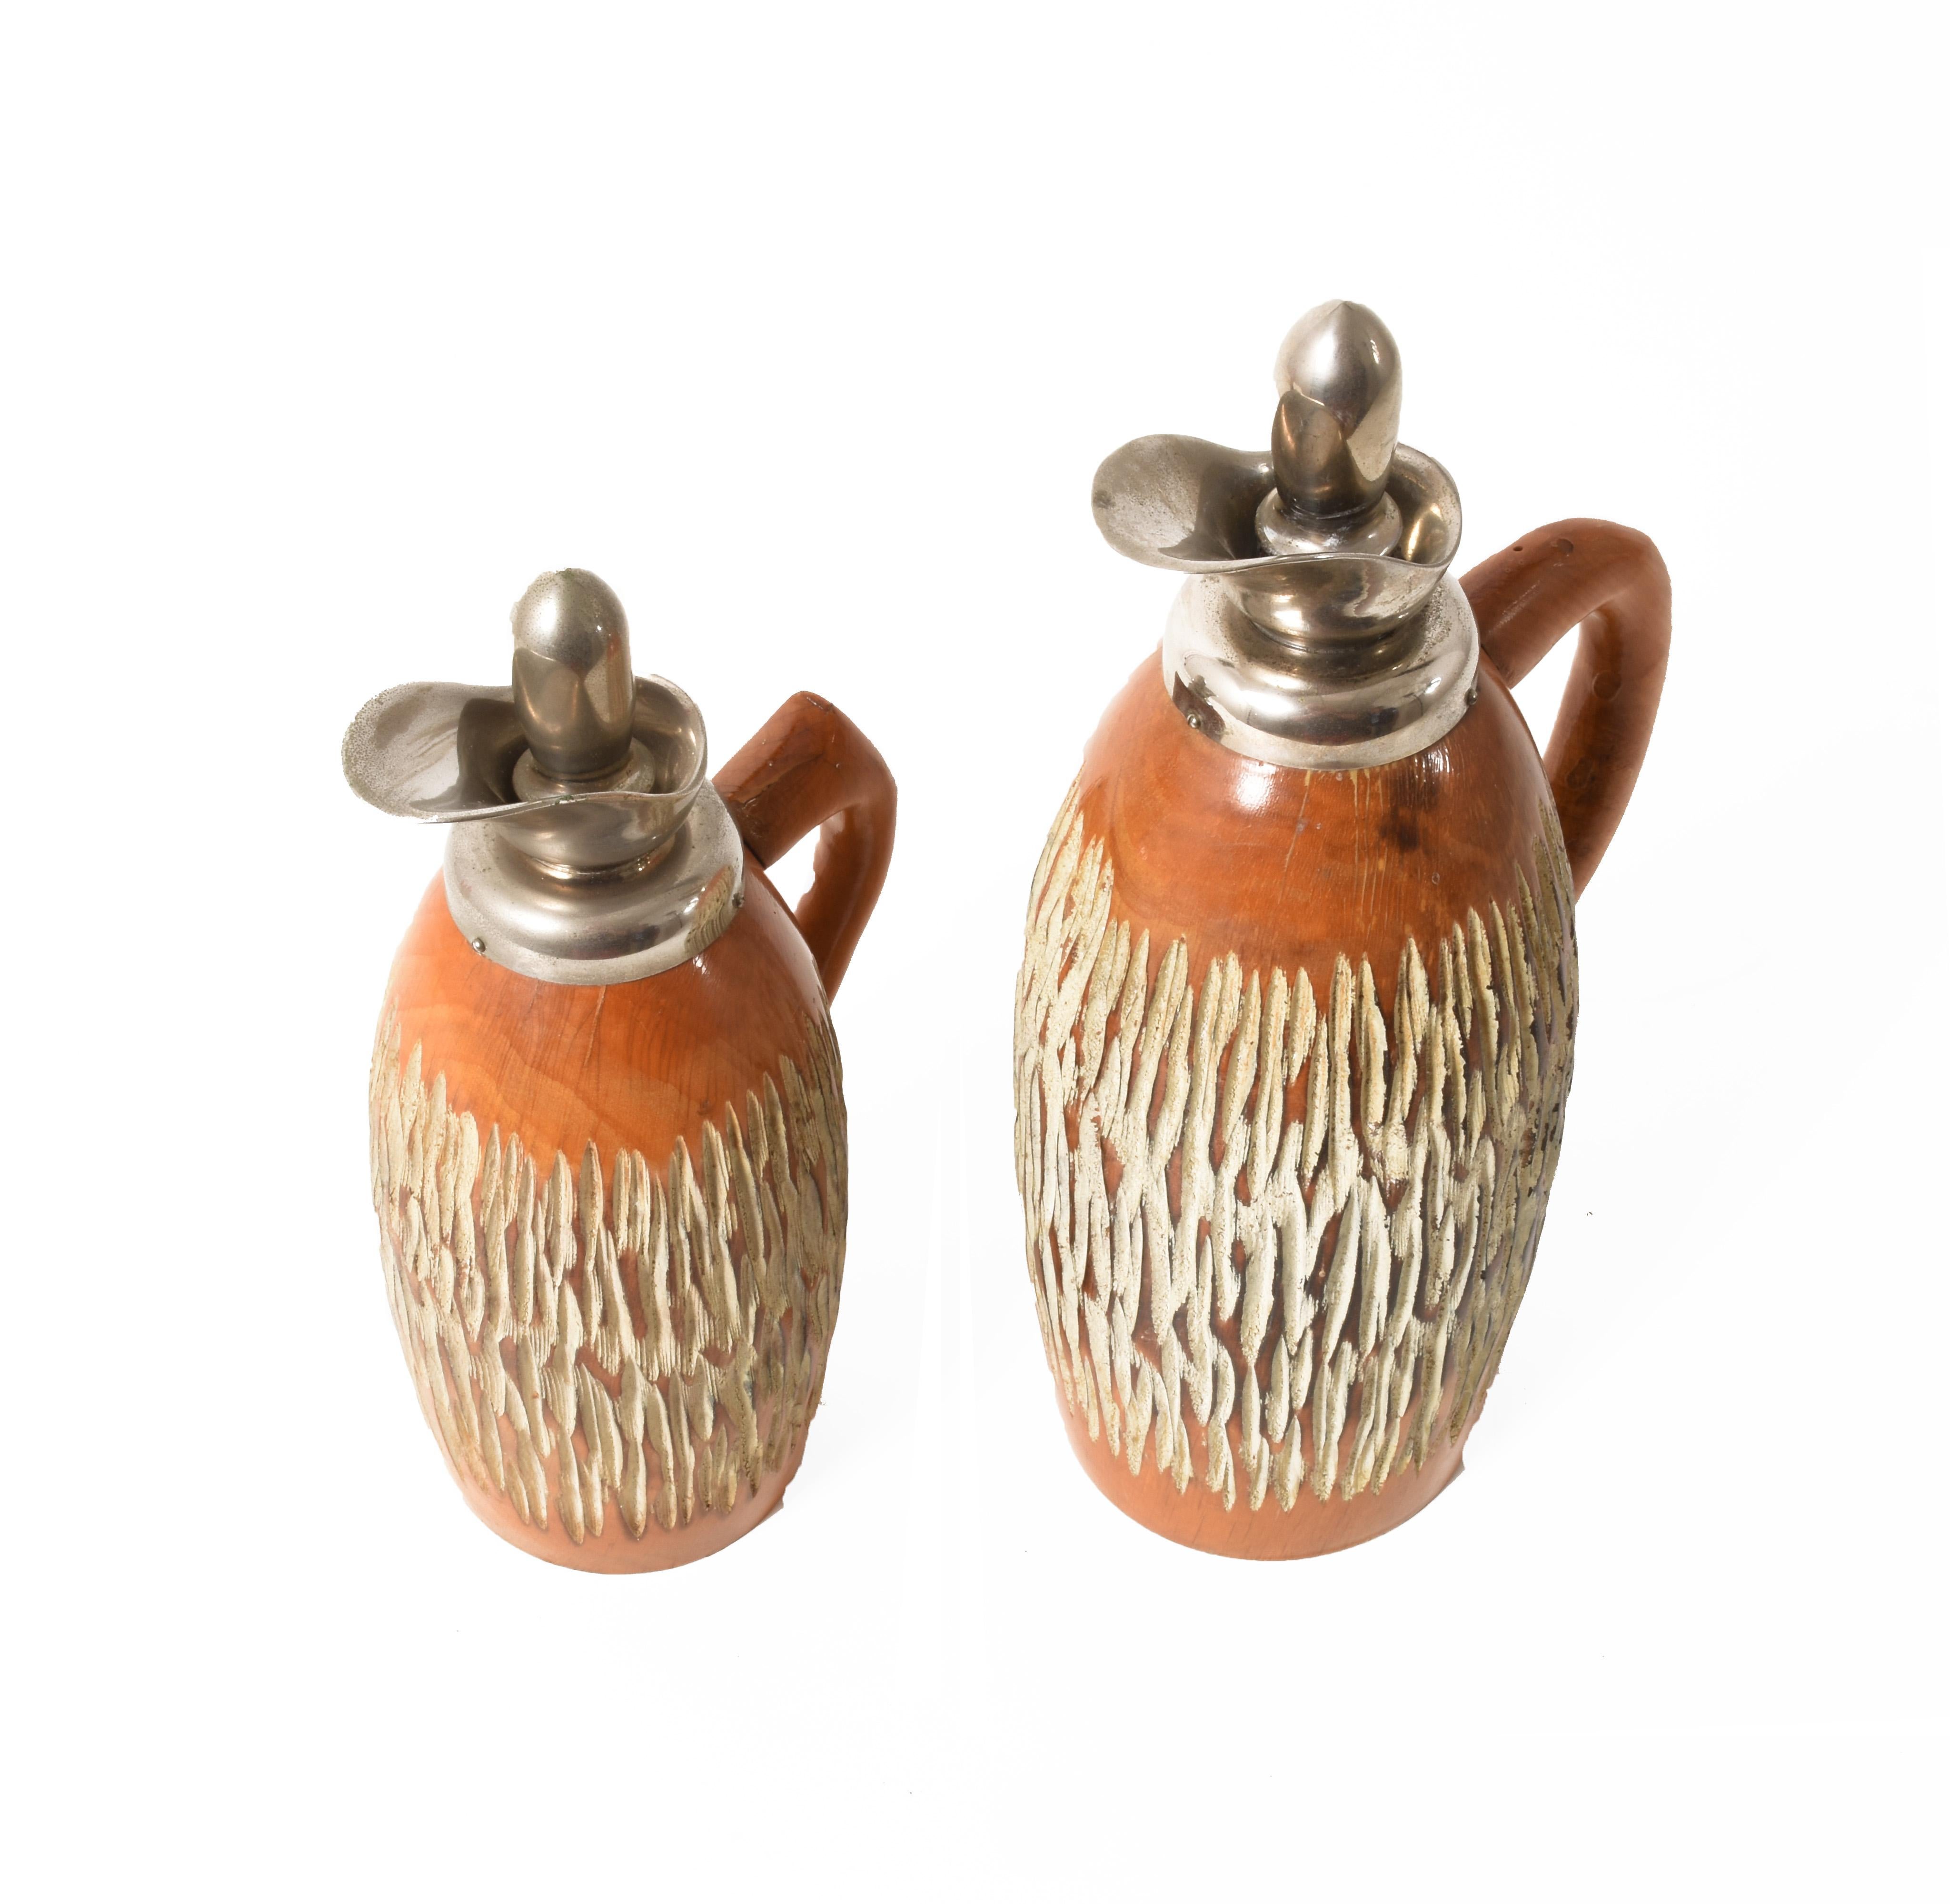 Set of two Thermos by Aldo Tura for Macabo Cusano Milanino, Milan, Italy, 1950s in carved wood
Measures: 31 x 17 cm
25 x 13 cm.
 